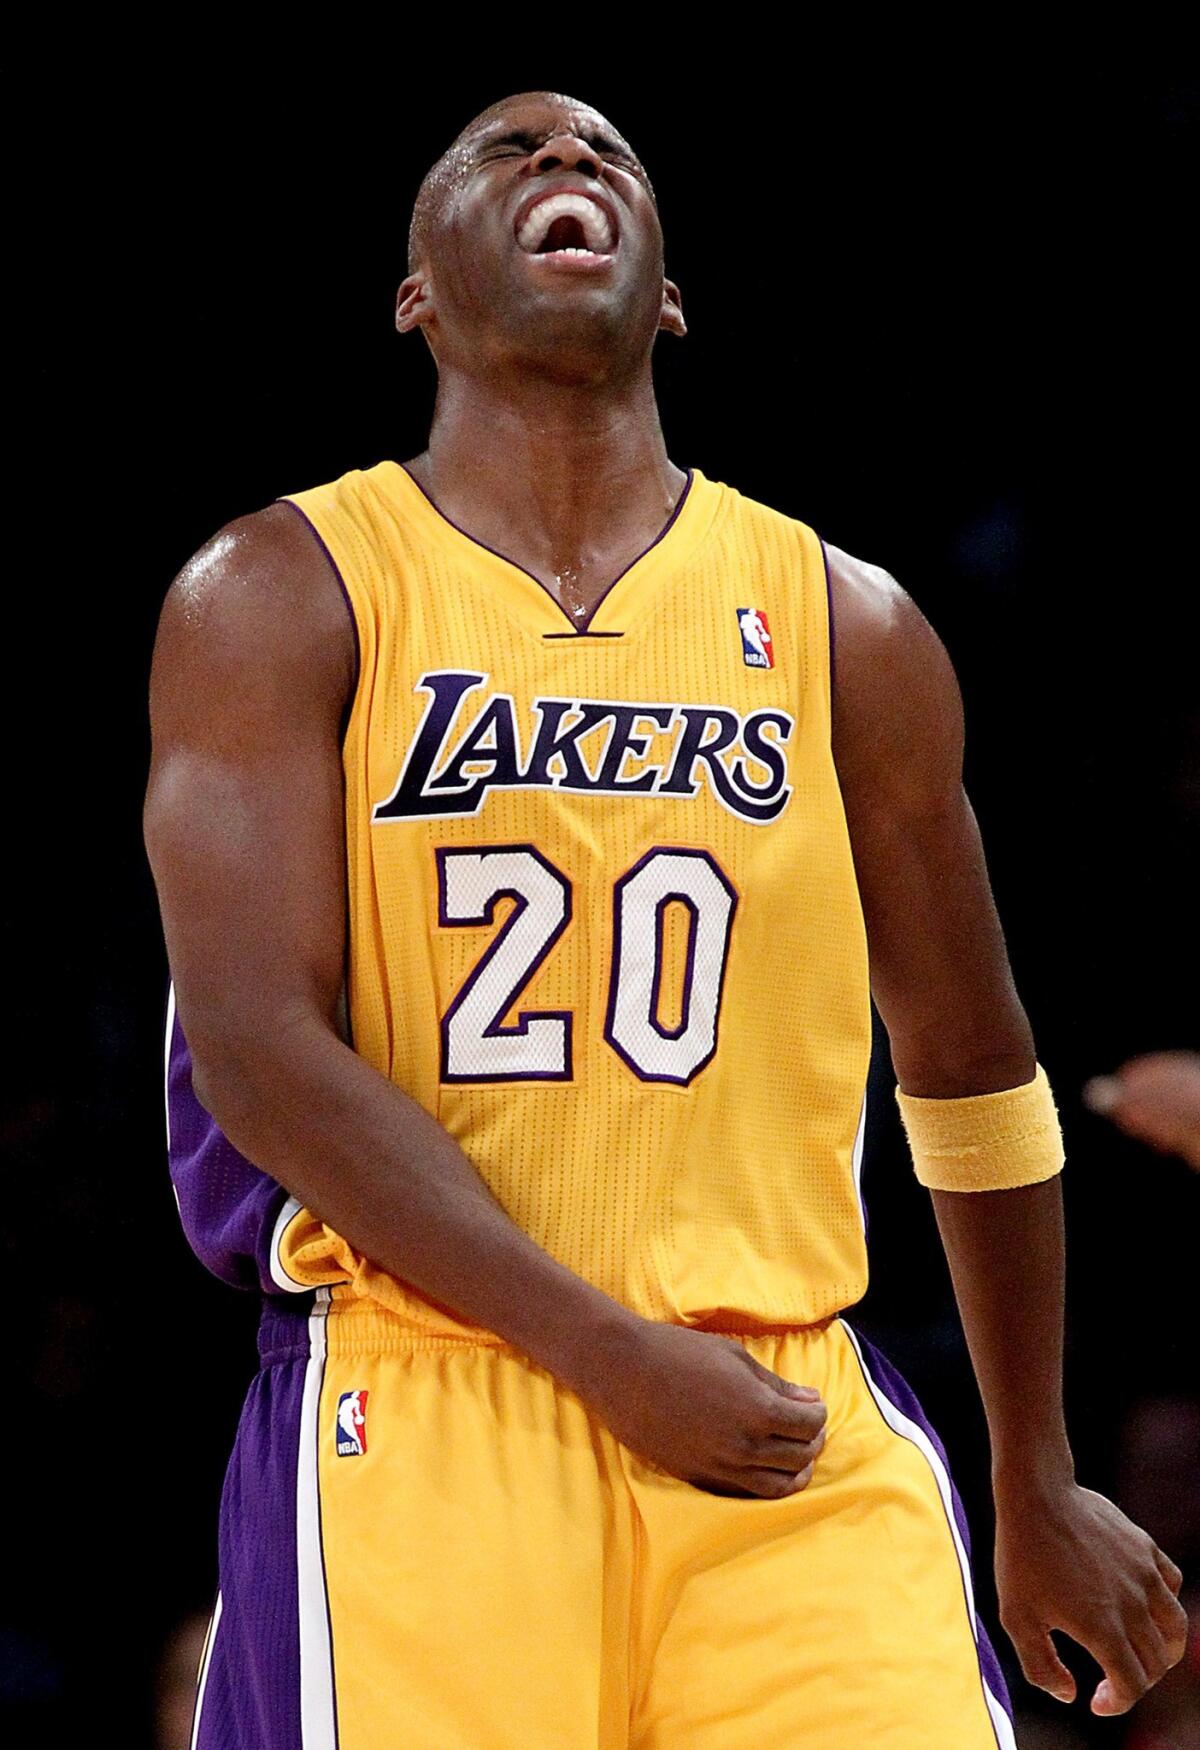 Lakers guard Jodie Meeks reacts after being called for a foul against the San Antonio Spurs at Staples Center on Nov. 1. Meeks, who has started just one of the Lakers' six games, is shooting 51% from the field to lead the Lakers and is tied with Pau Gasol for the team lead in scoring at 12.5 points per game.